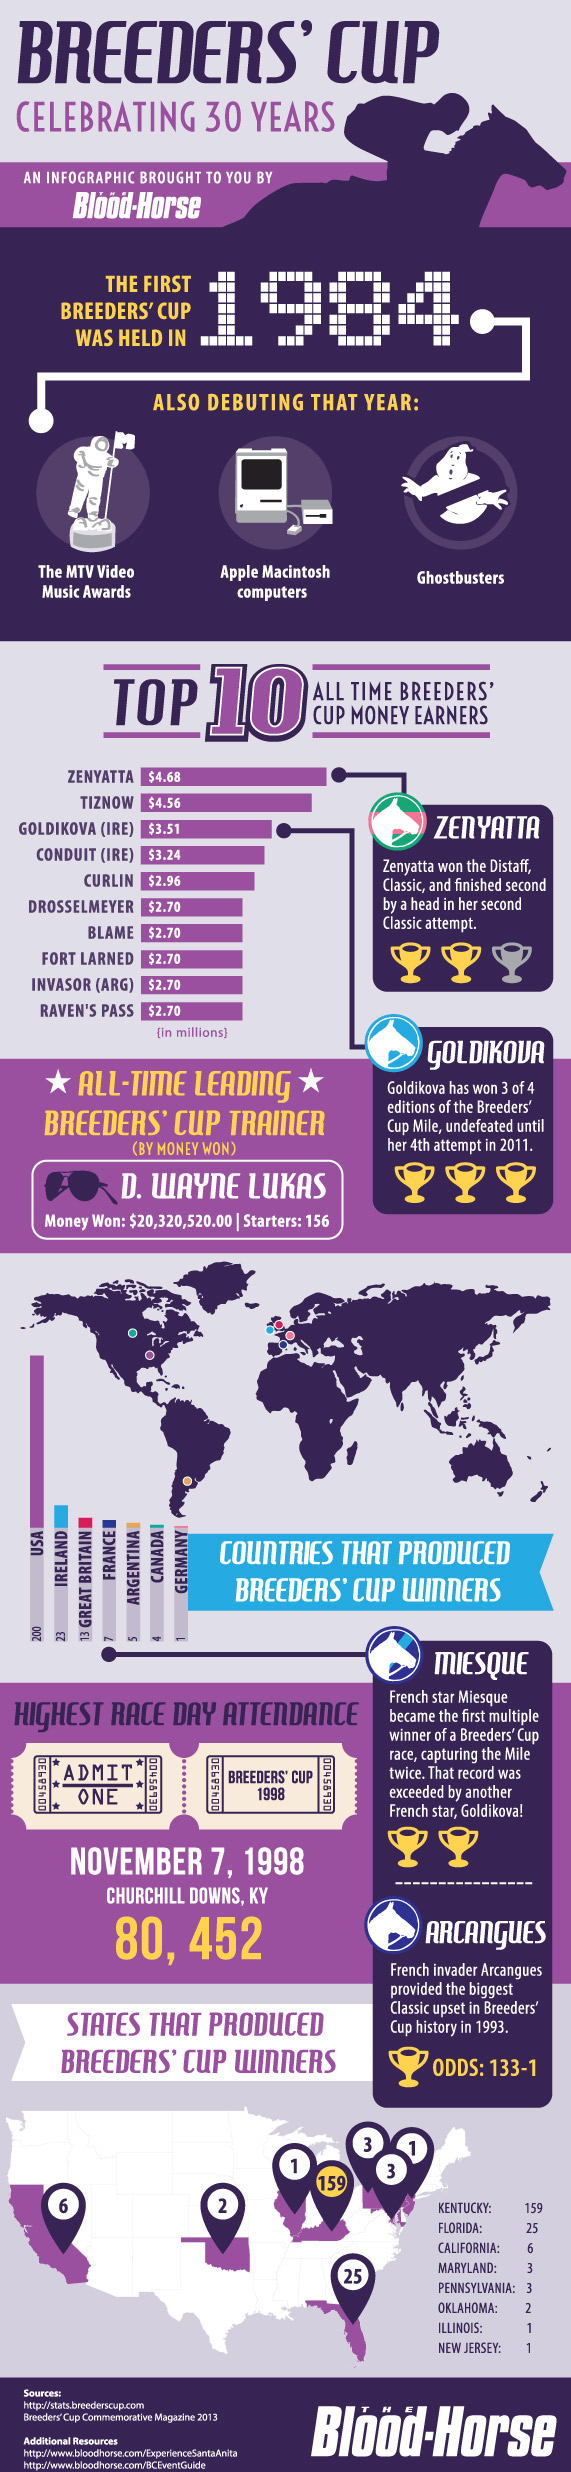 thorougbred Horse racing infographic Breeders' Cup